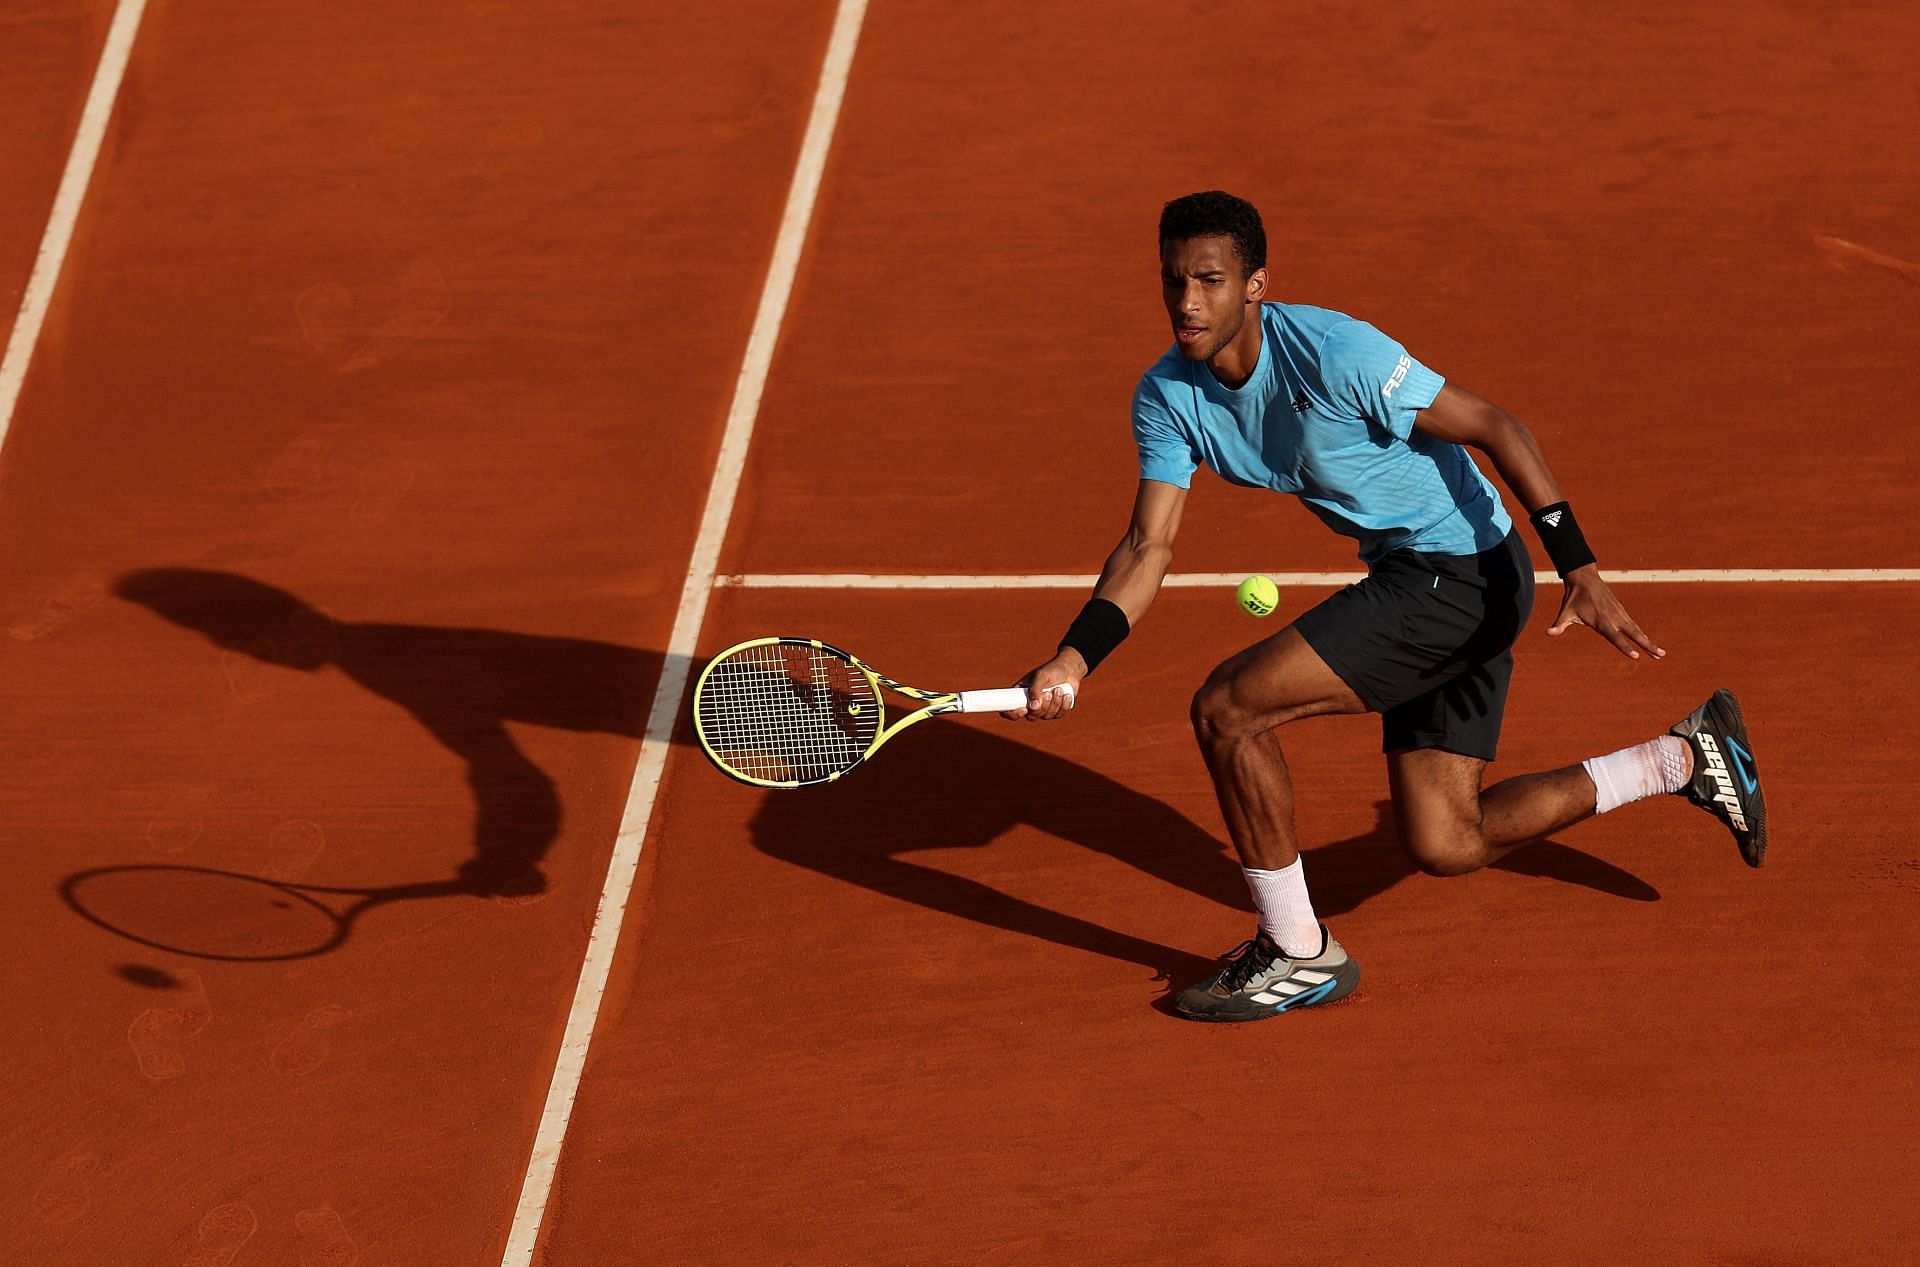 Felix Auger Aliassime will open play on the central Court Rainier III.